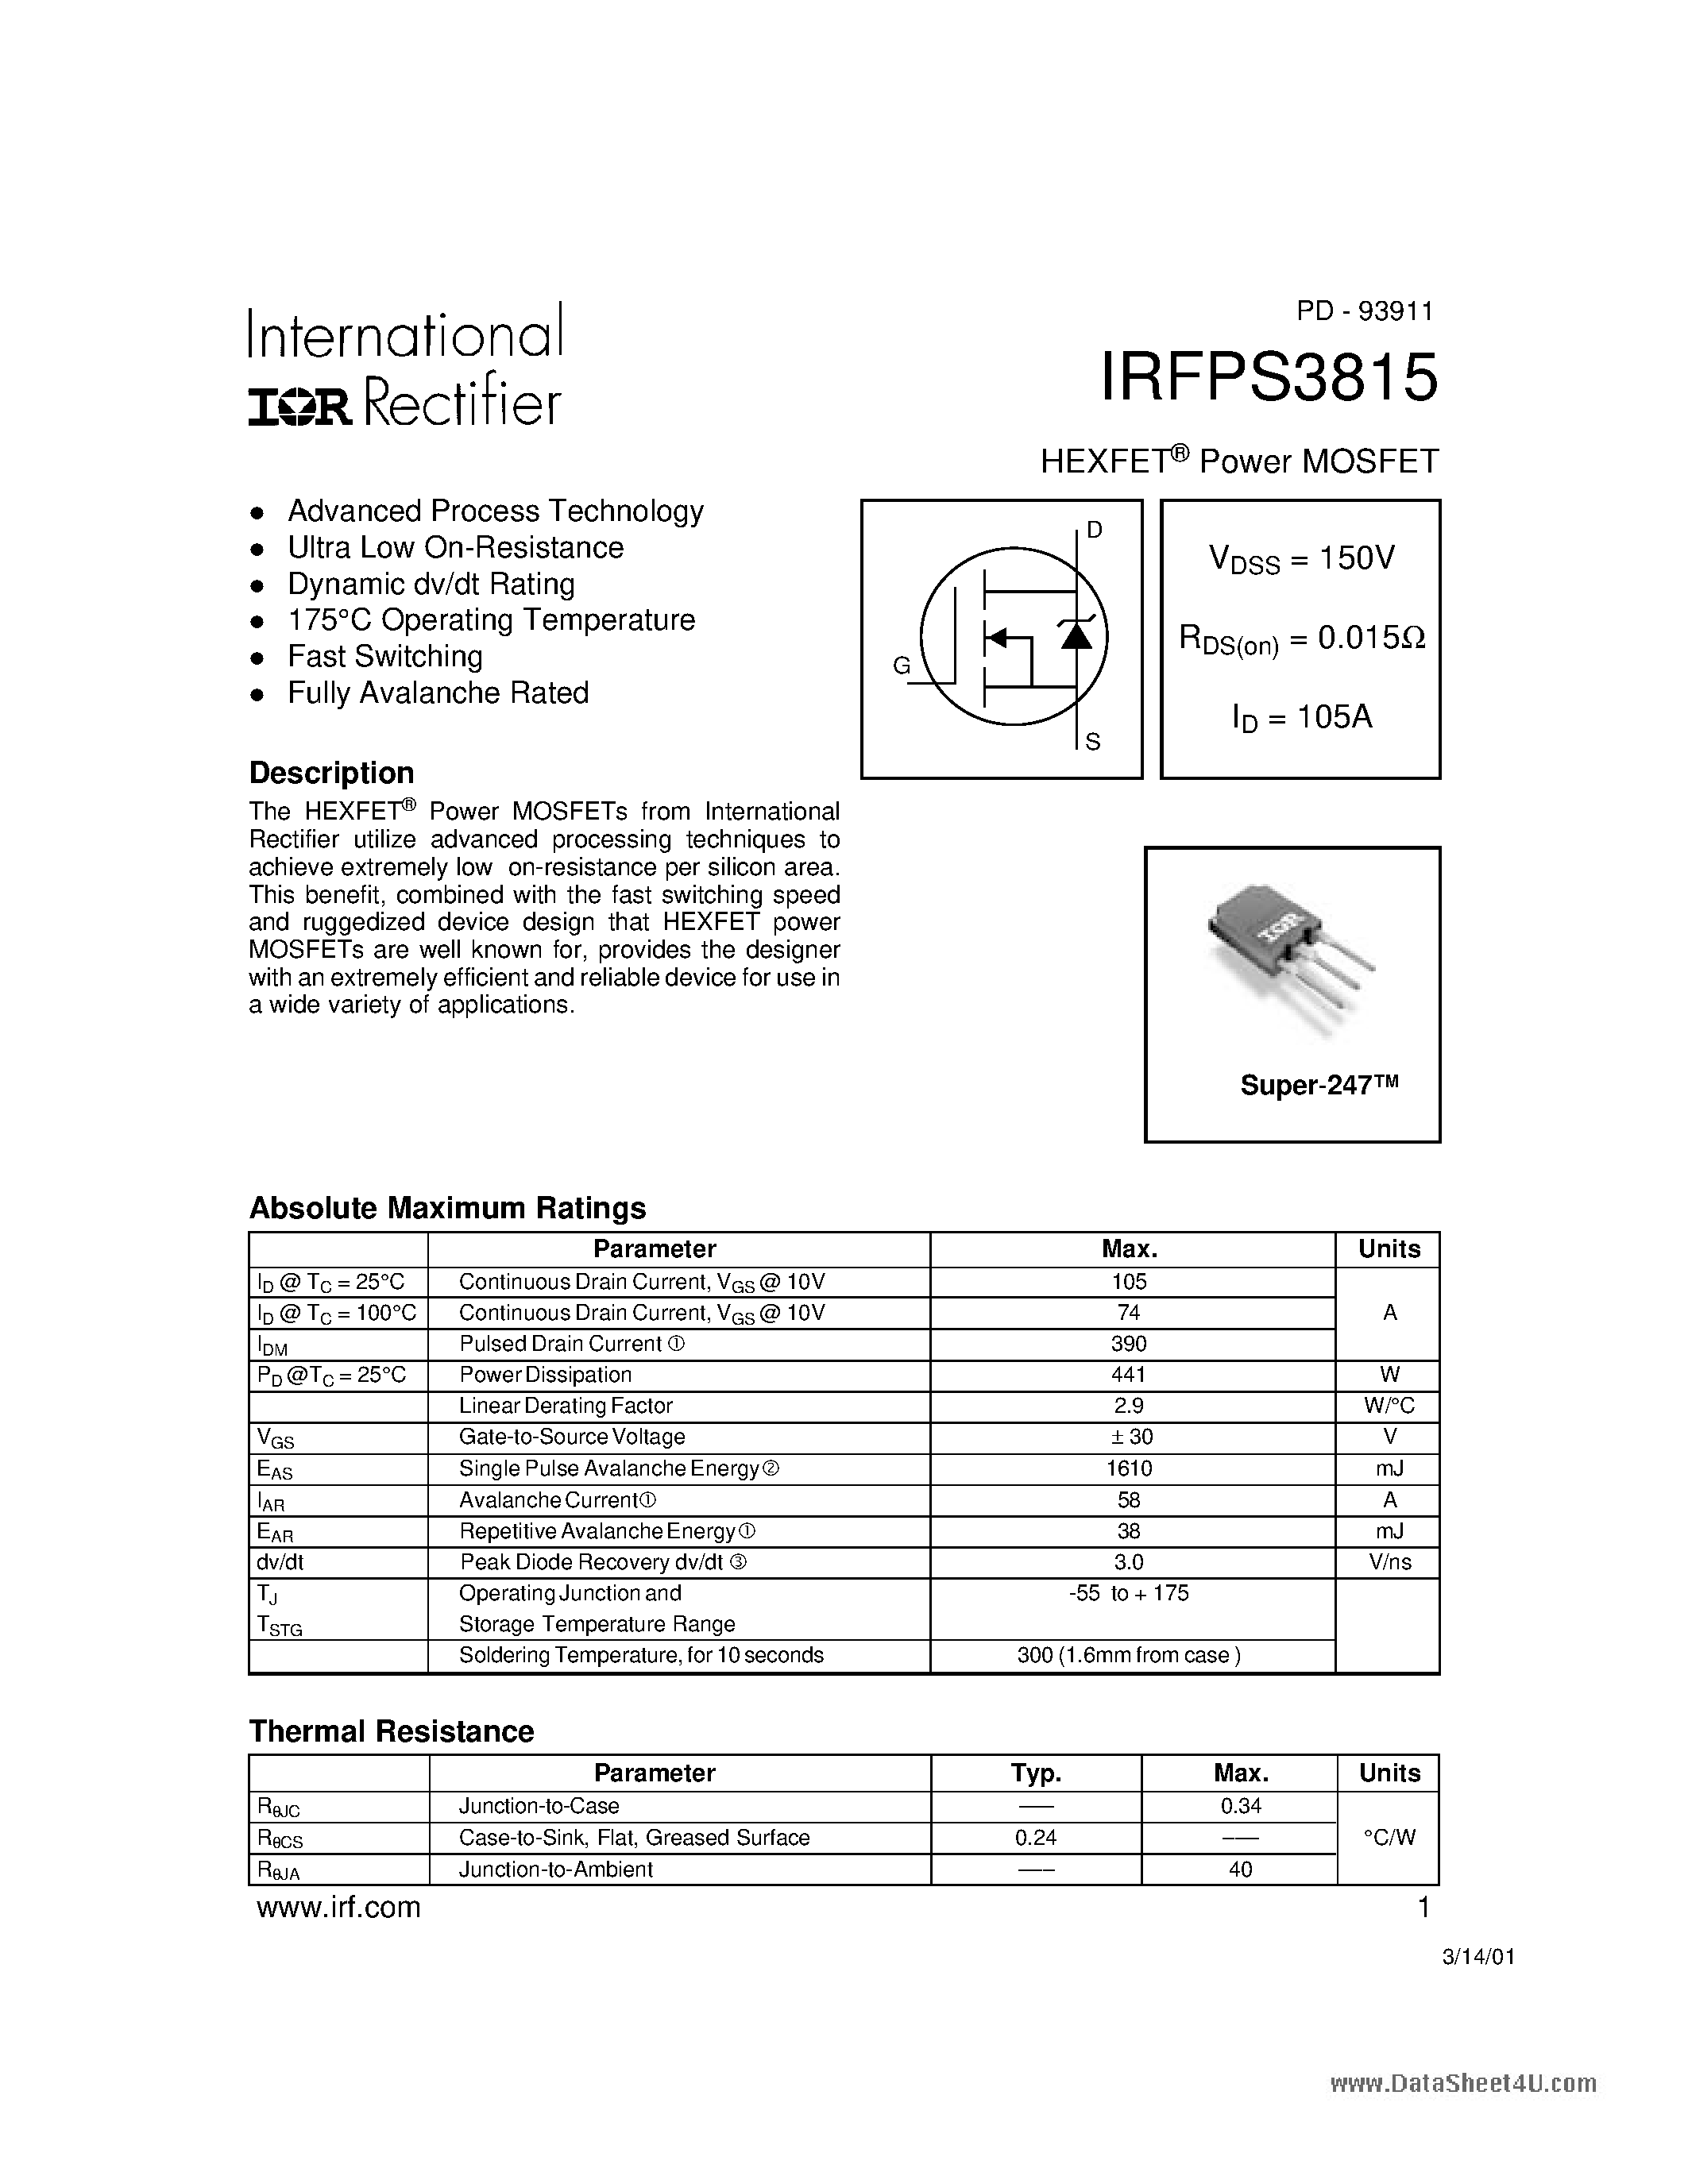 Datasheet IRFPS3815 - HEXFET Power MOSFET page 1